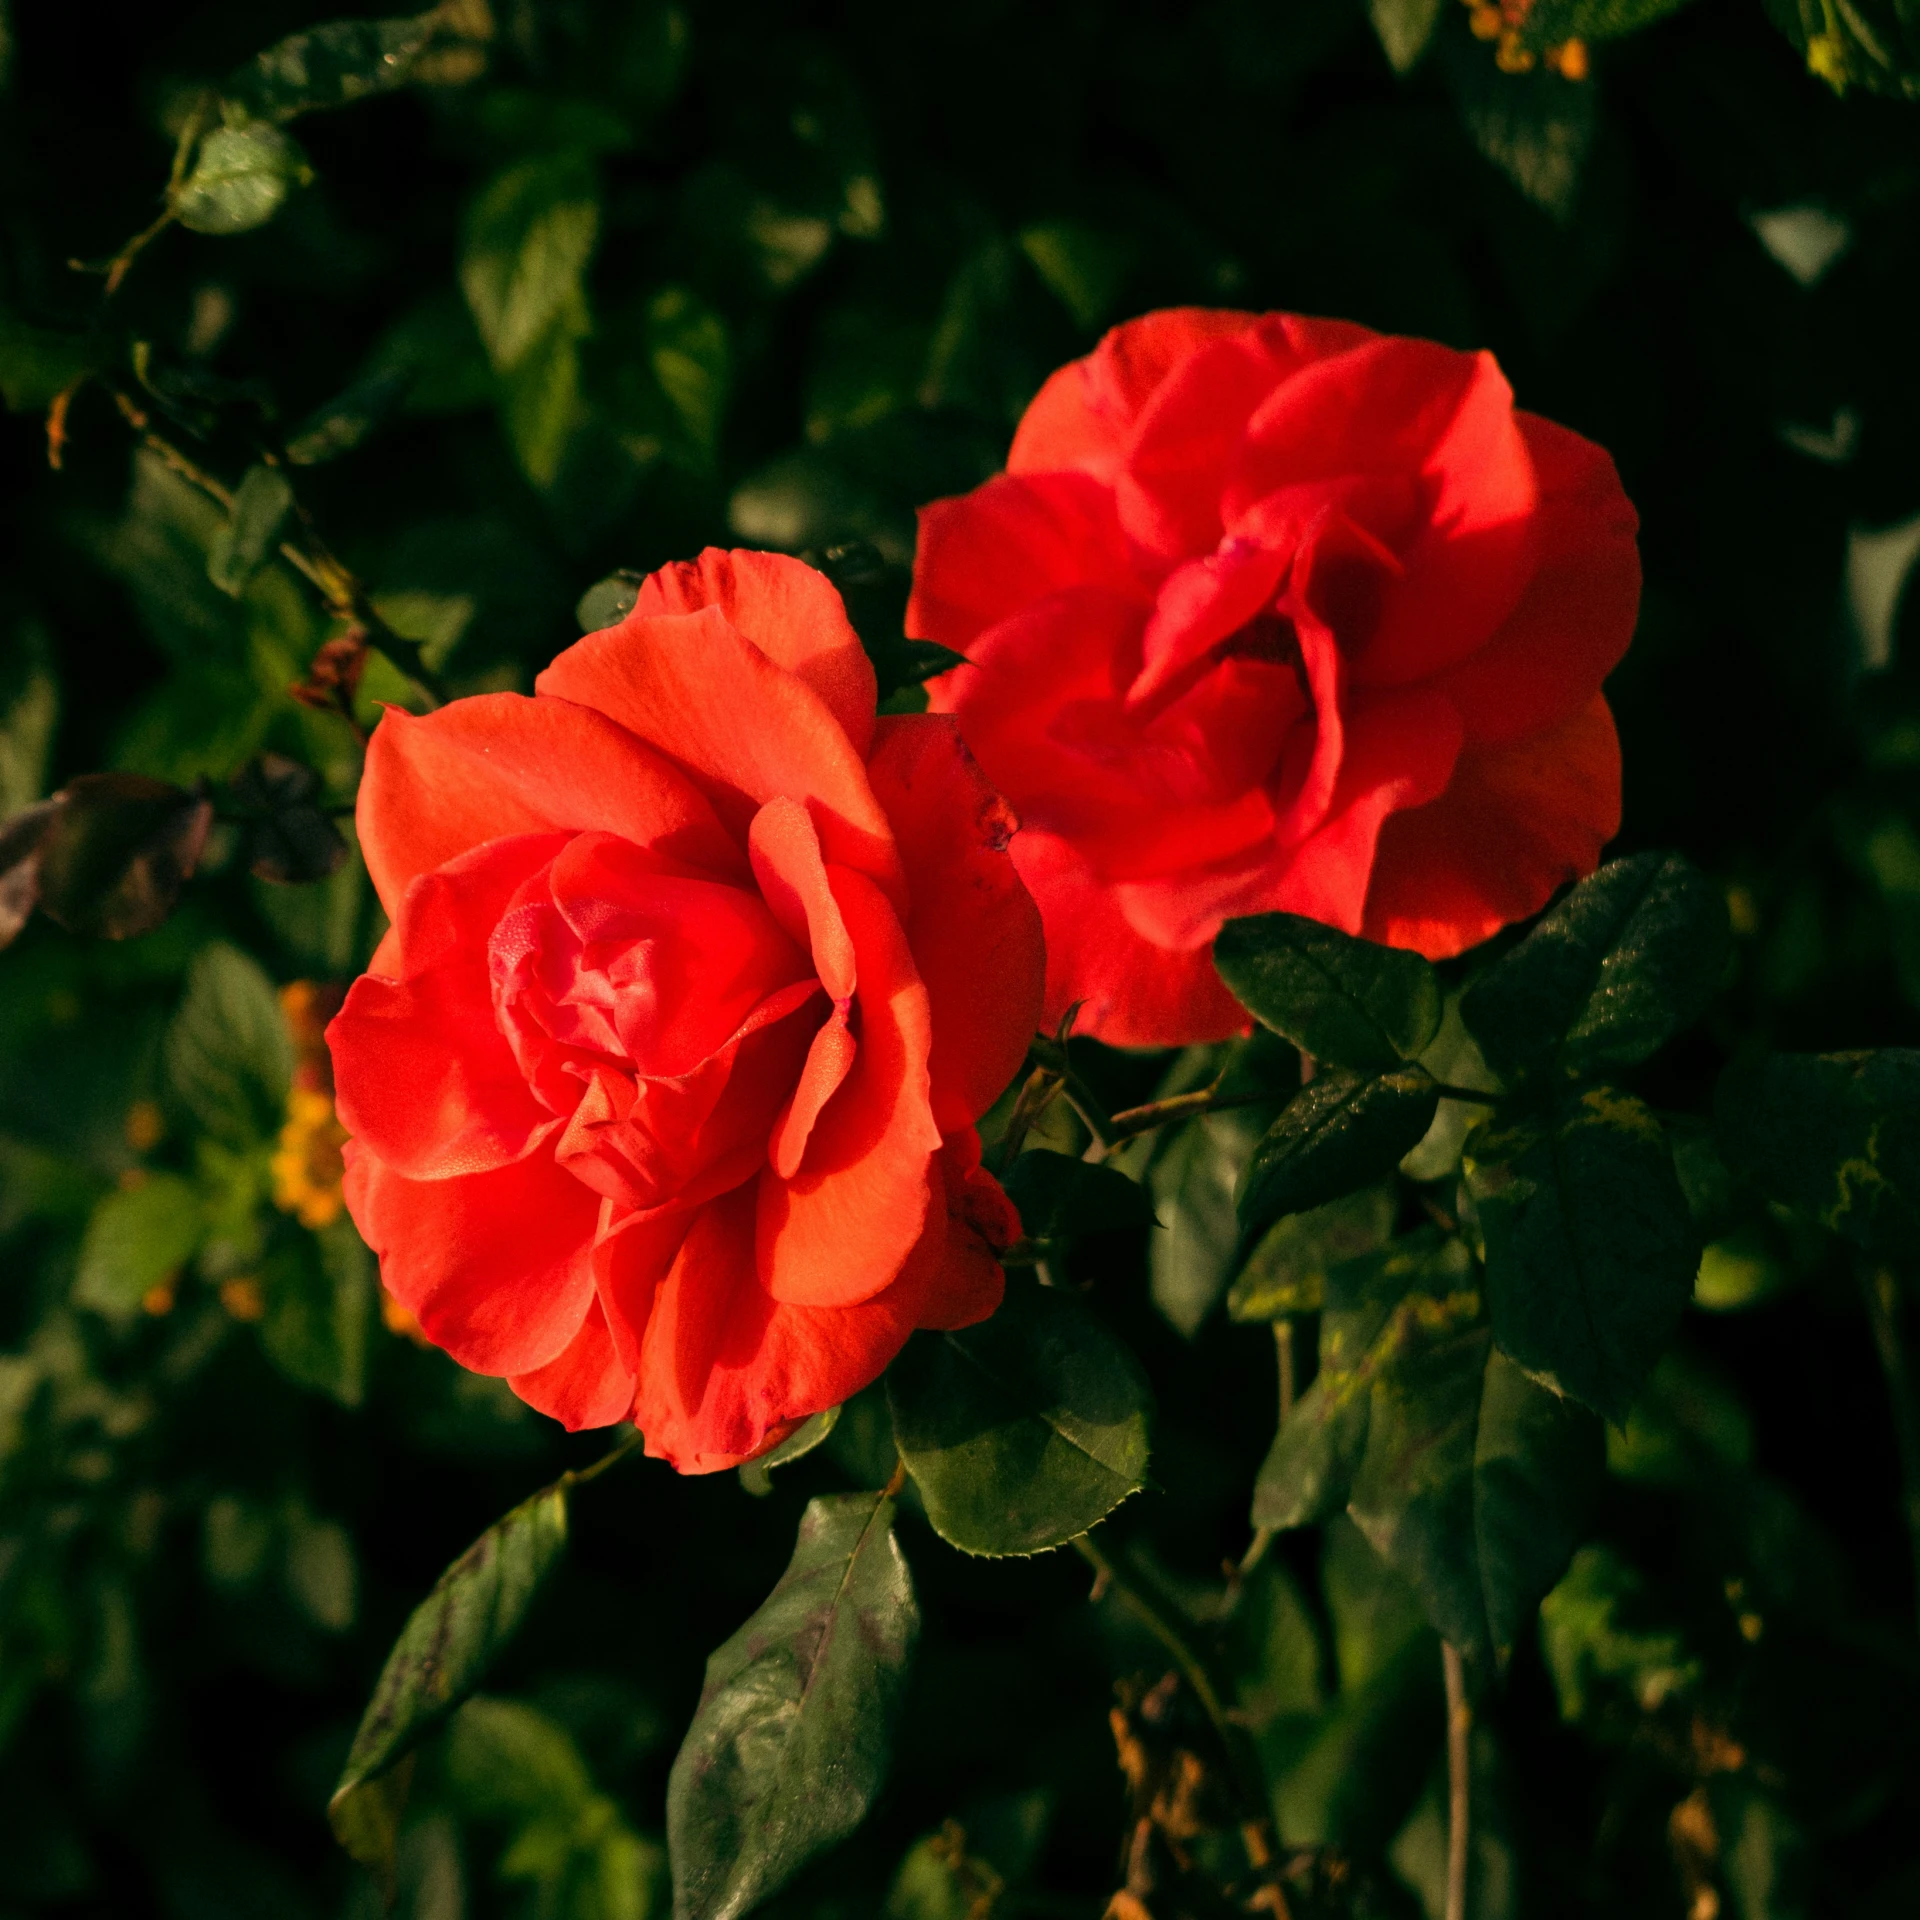 the two red roses are blooming on the bush